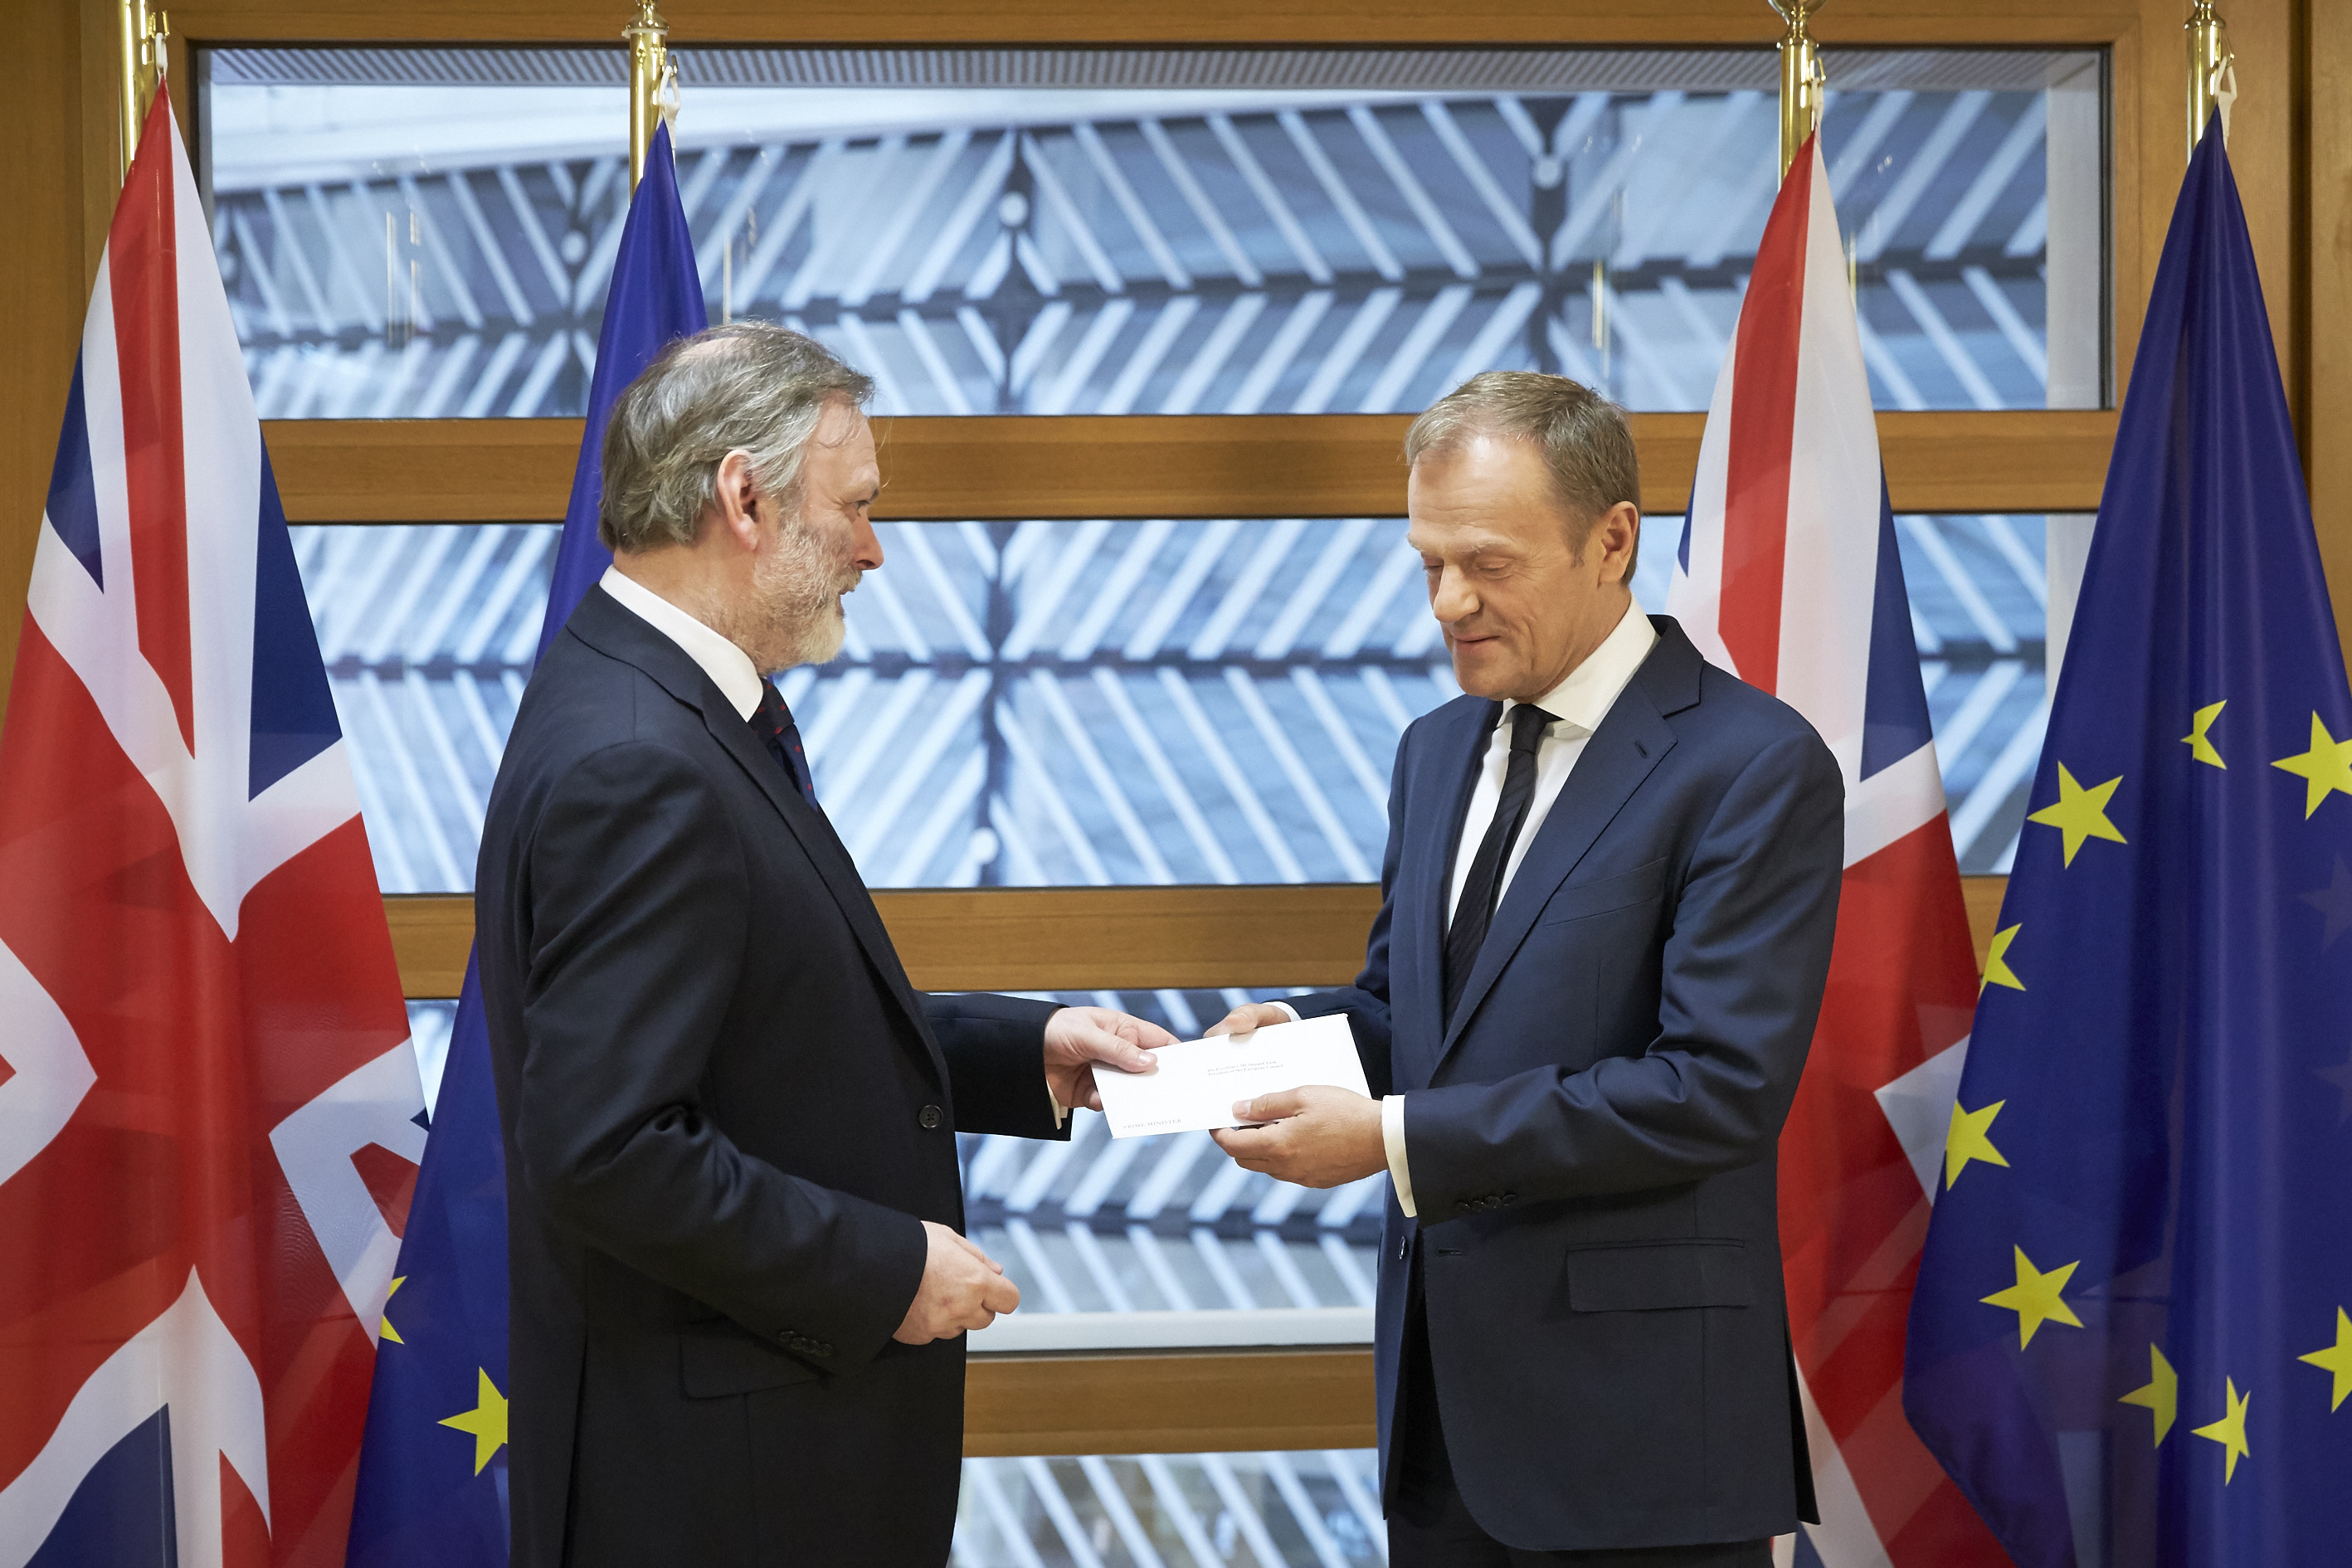 Sir Tim Barrow the UKs permanent representative to the EU hands the letter triggering Article 50  to the President of the European Council Donald Tusk.